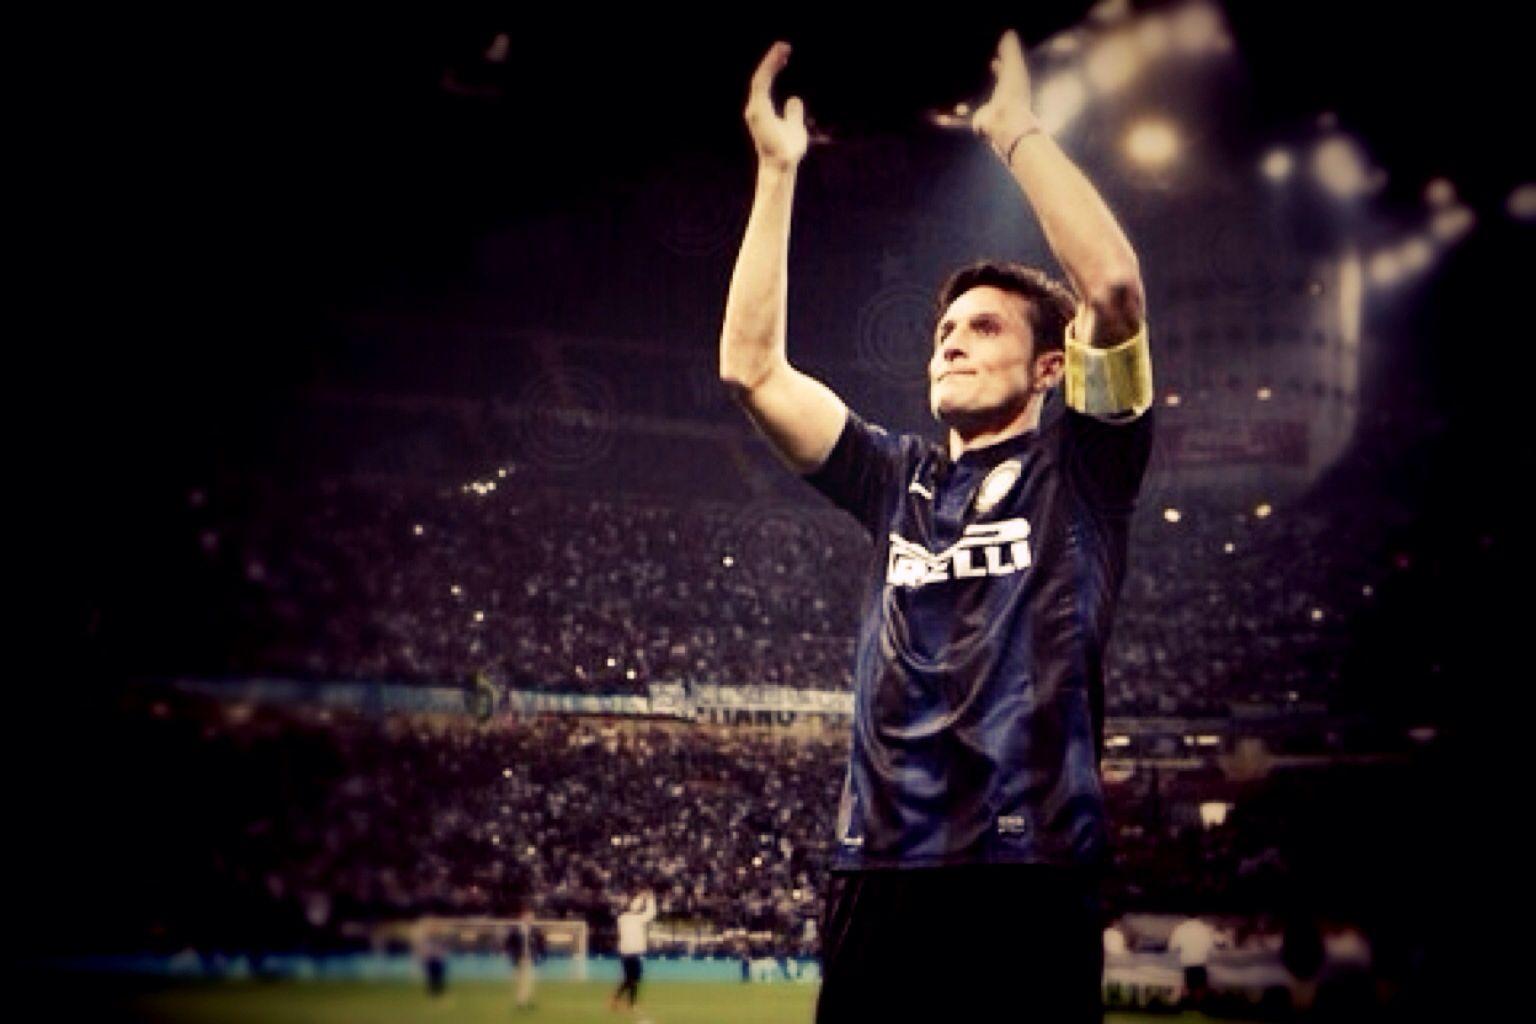 There is no one like Javier Zanetti, his dedication, commitments